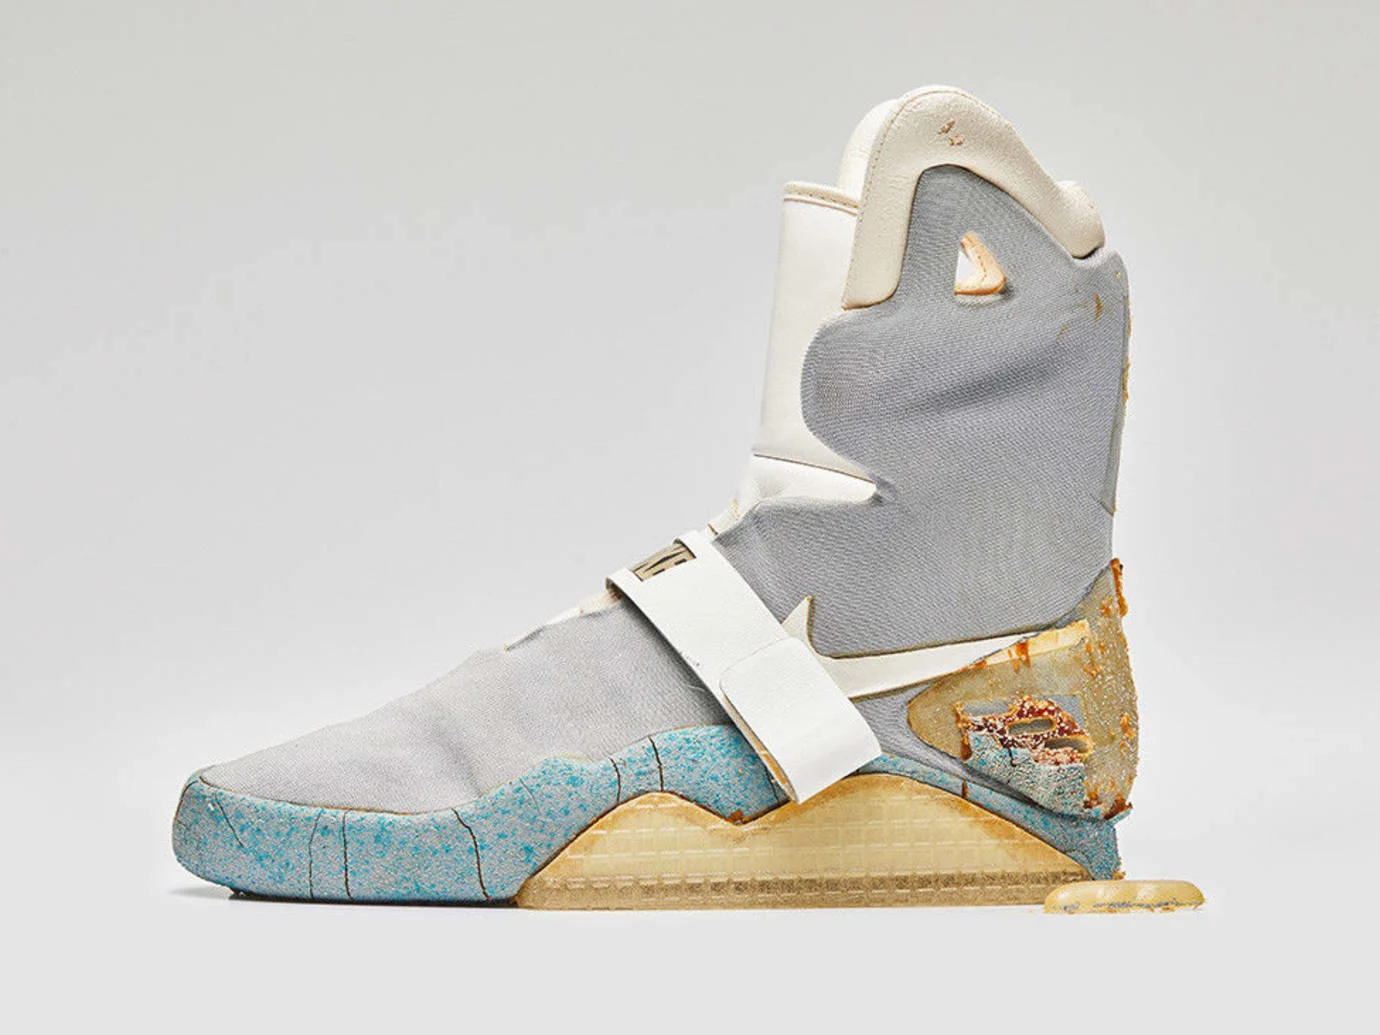 A shoe from the Nike MAG- mongersmint